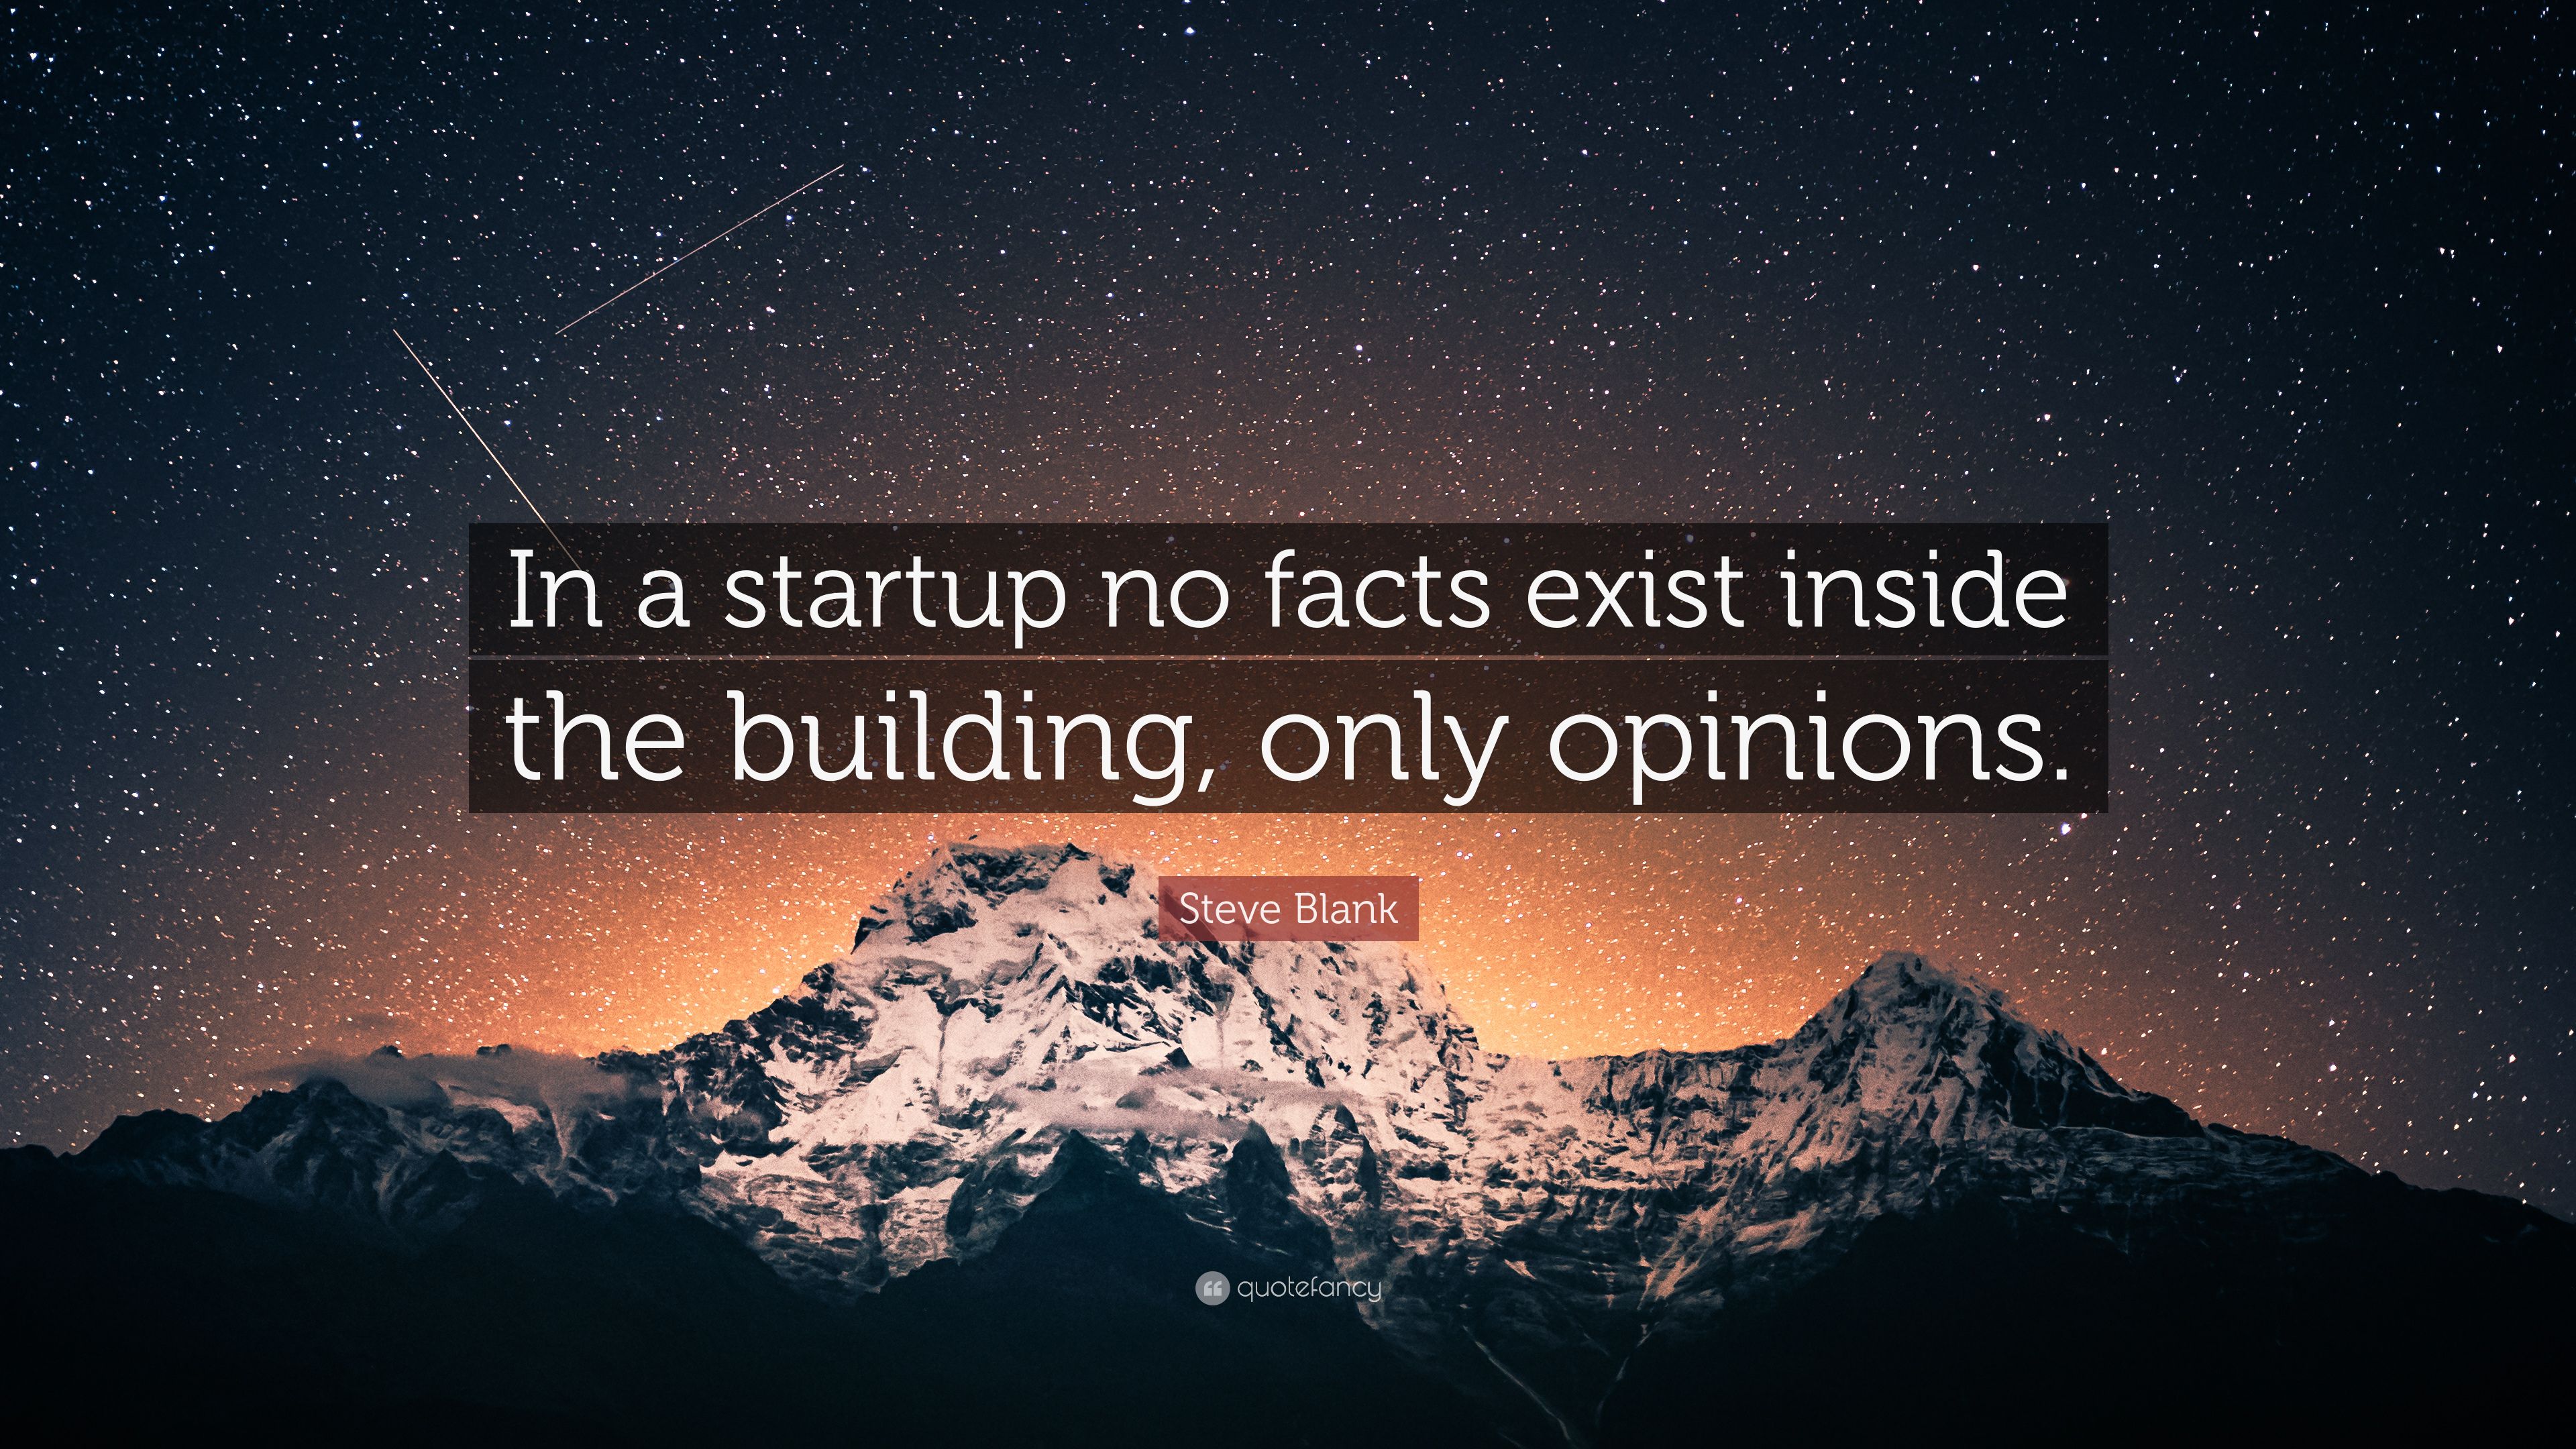 Steve Blank Quote: “In a startup no facts exist inside the building